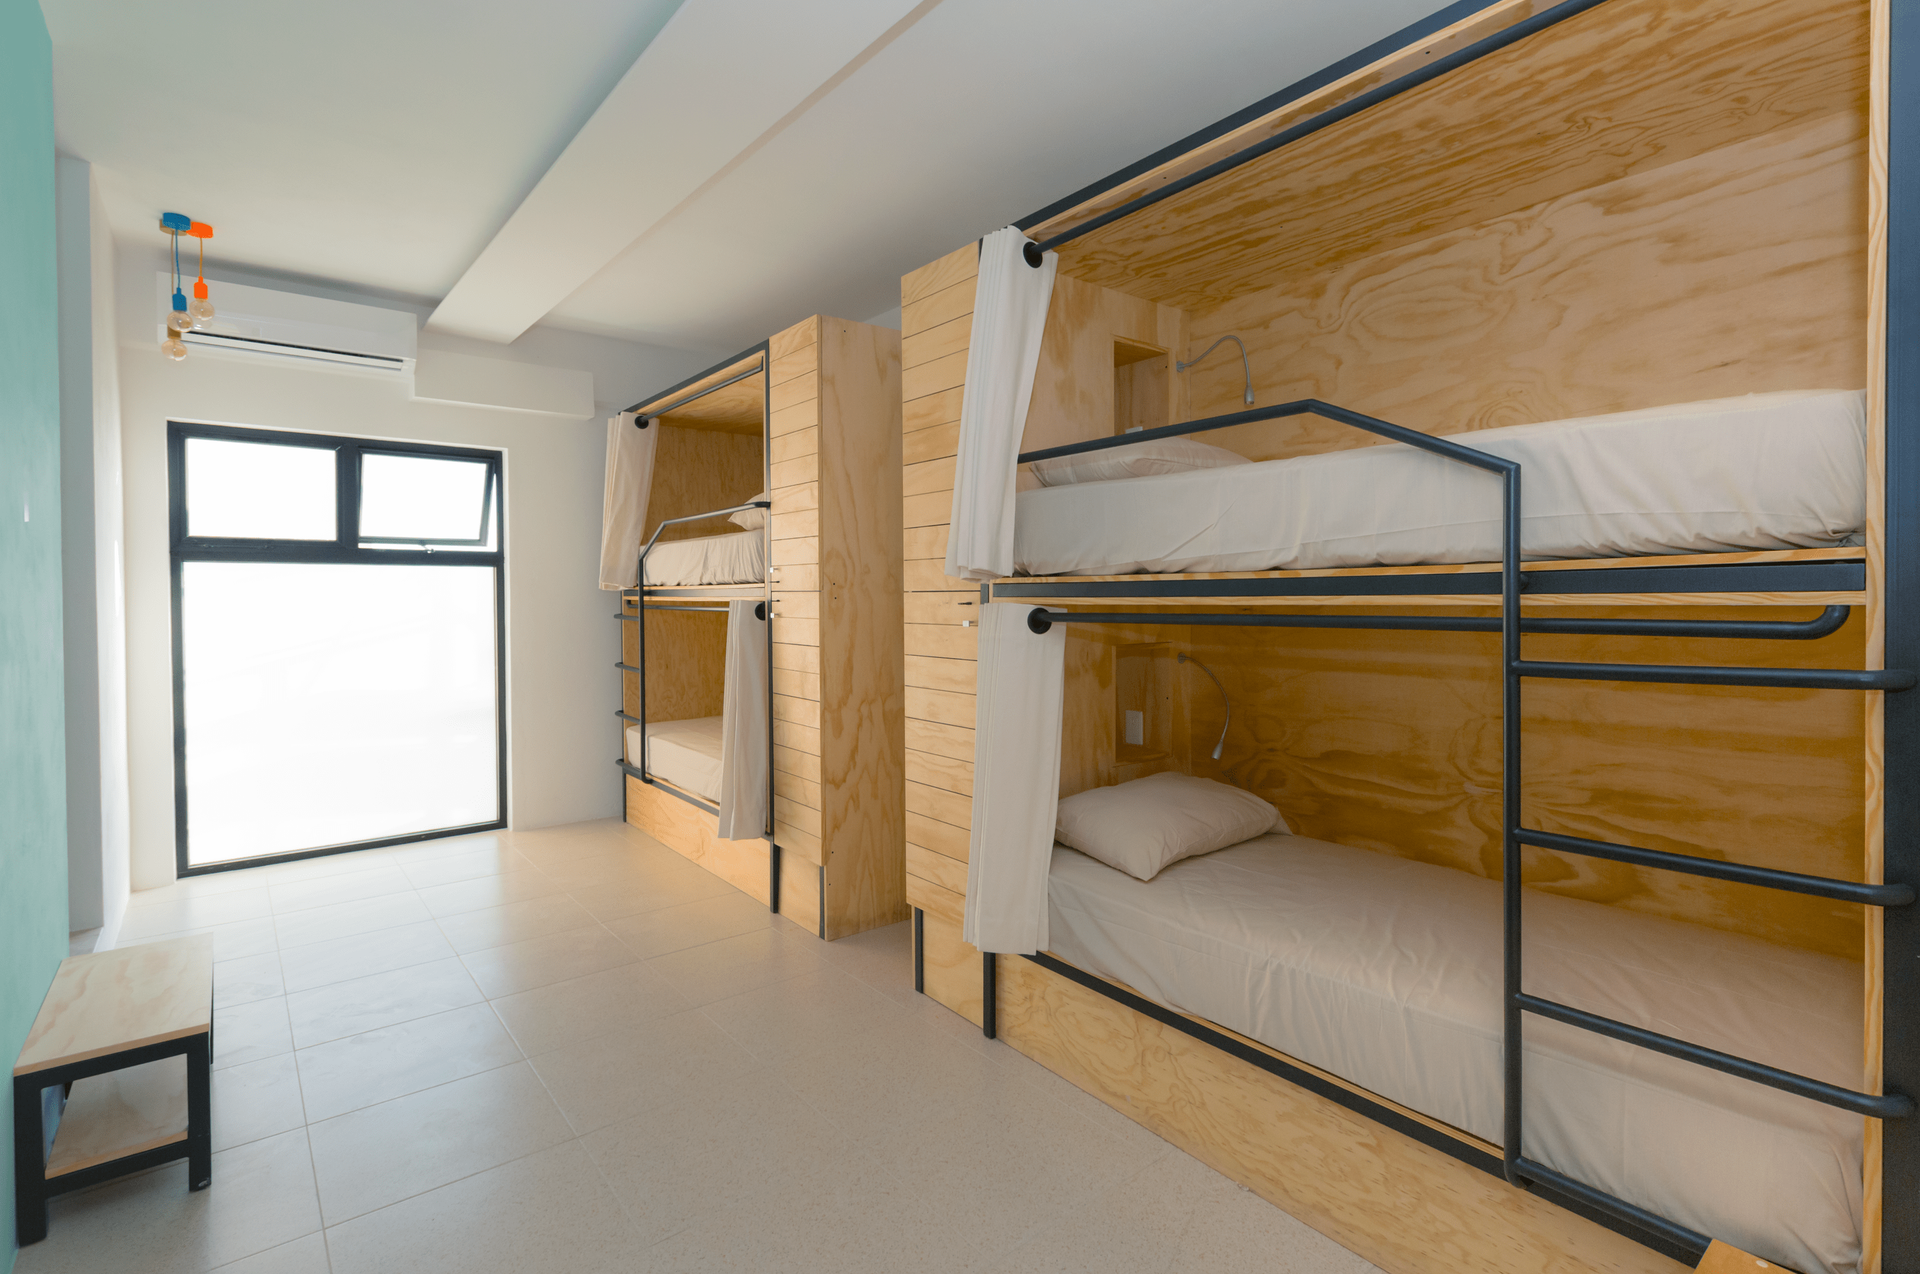 A room with a lot of bunk beds in it